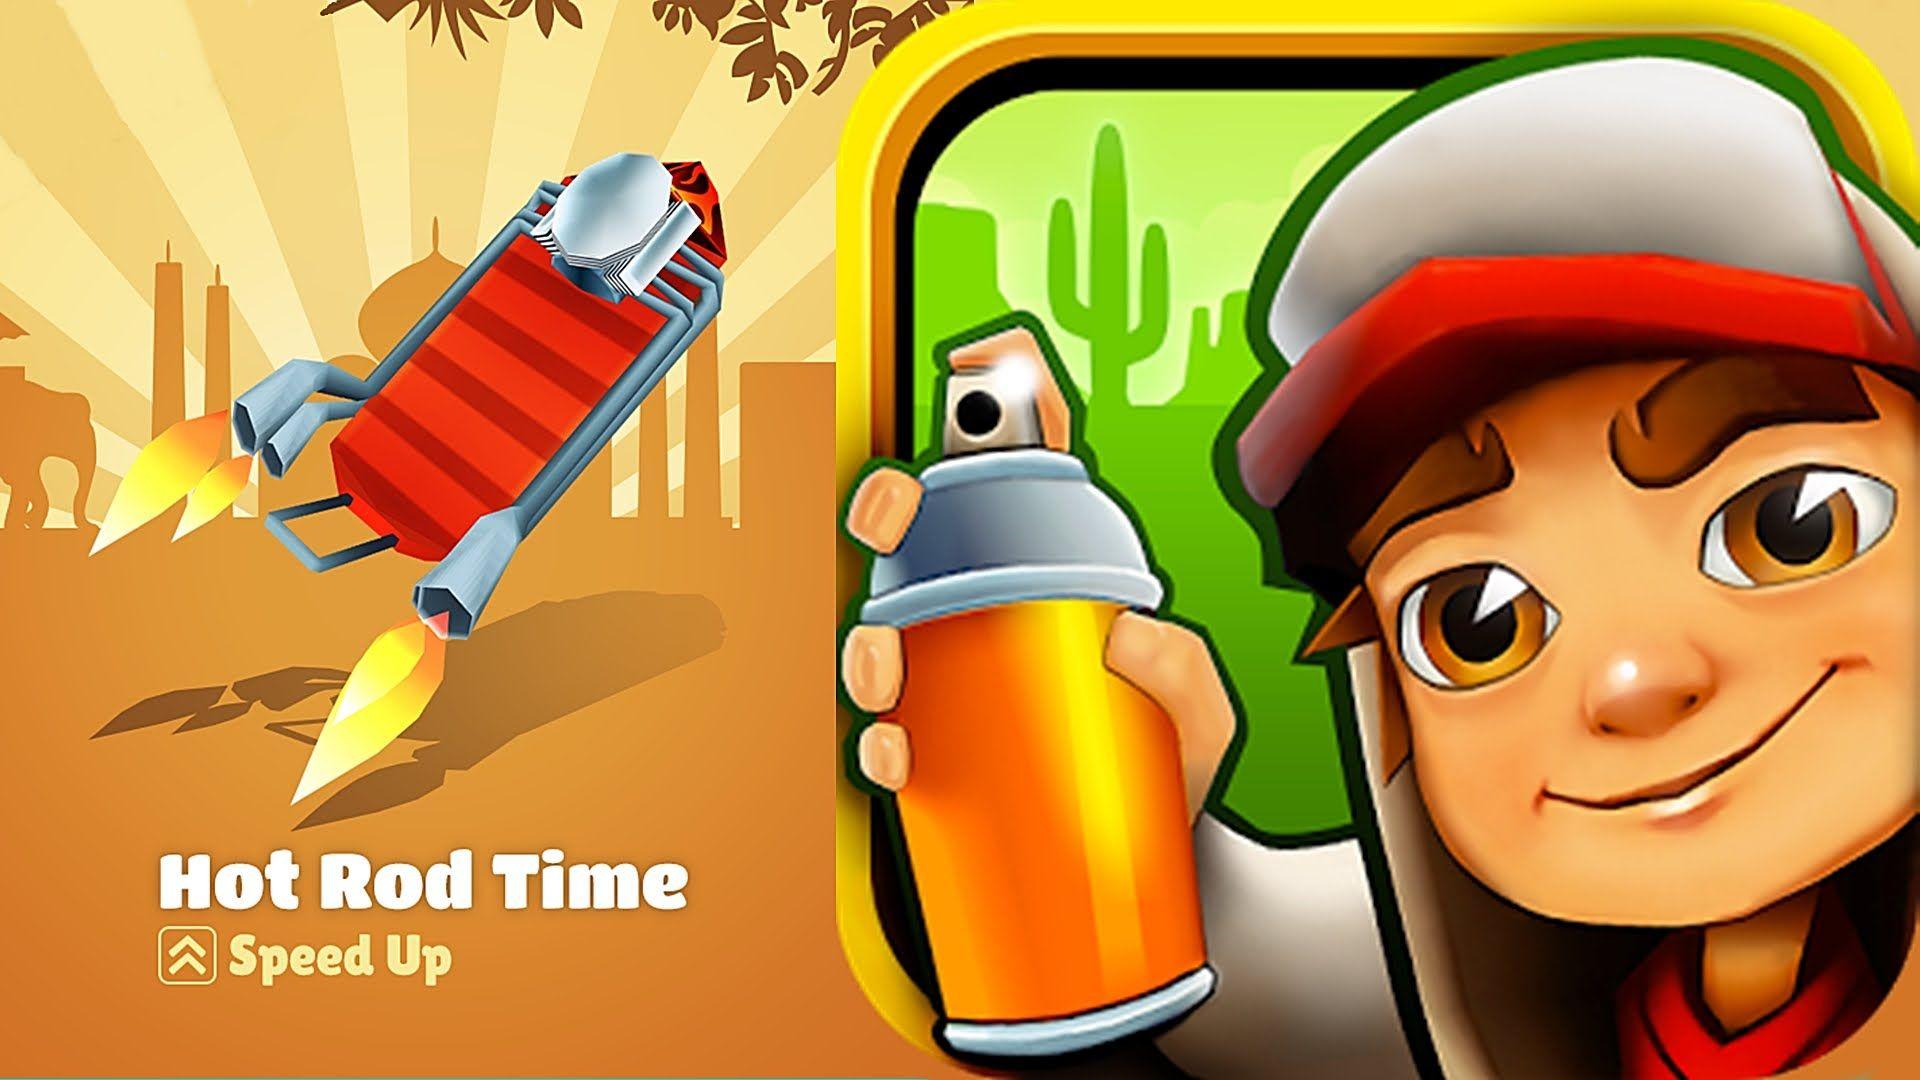 Download Free Android Game Subway Surfers Match - 18642 - MobileSMSPK.net